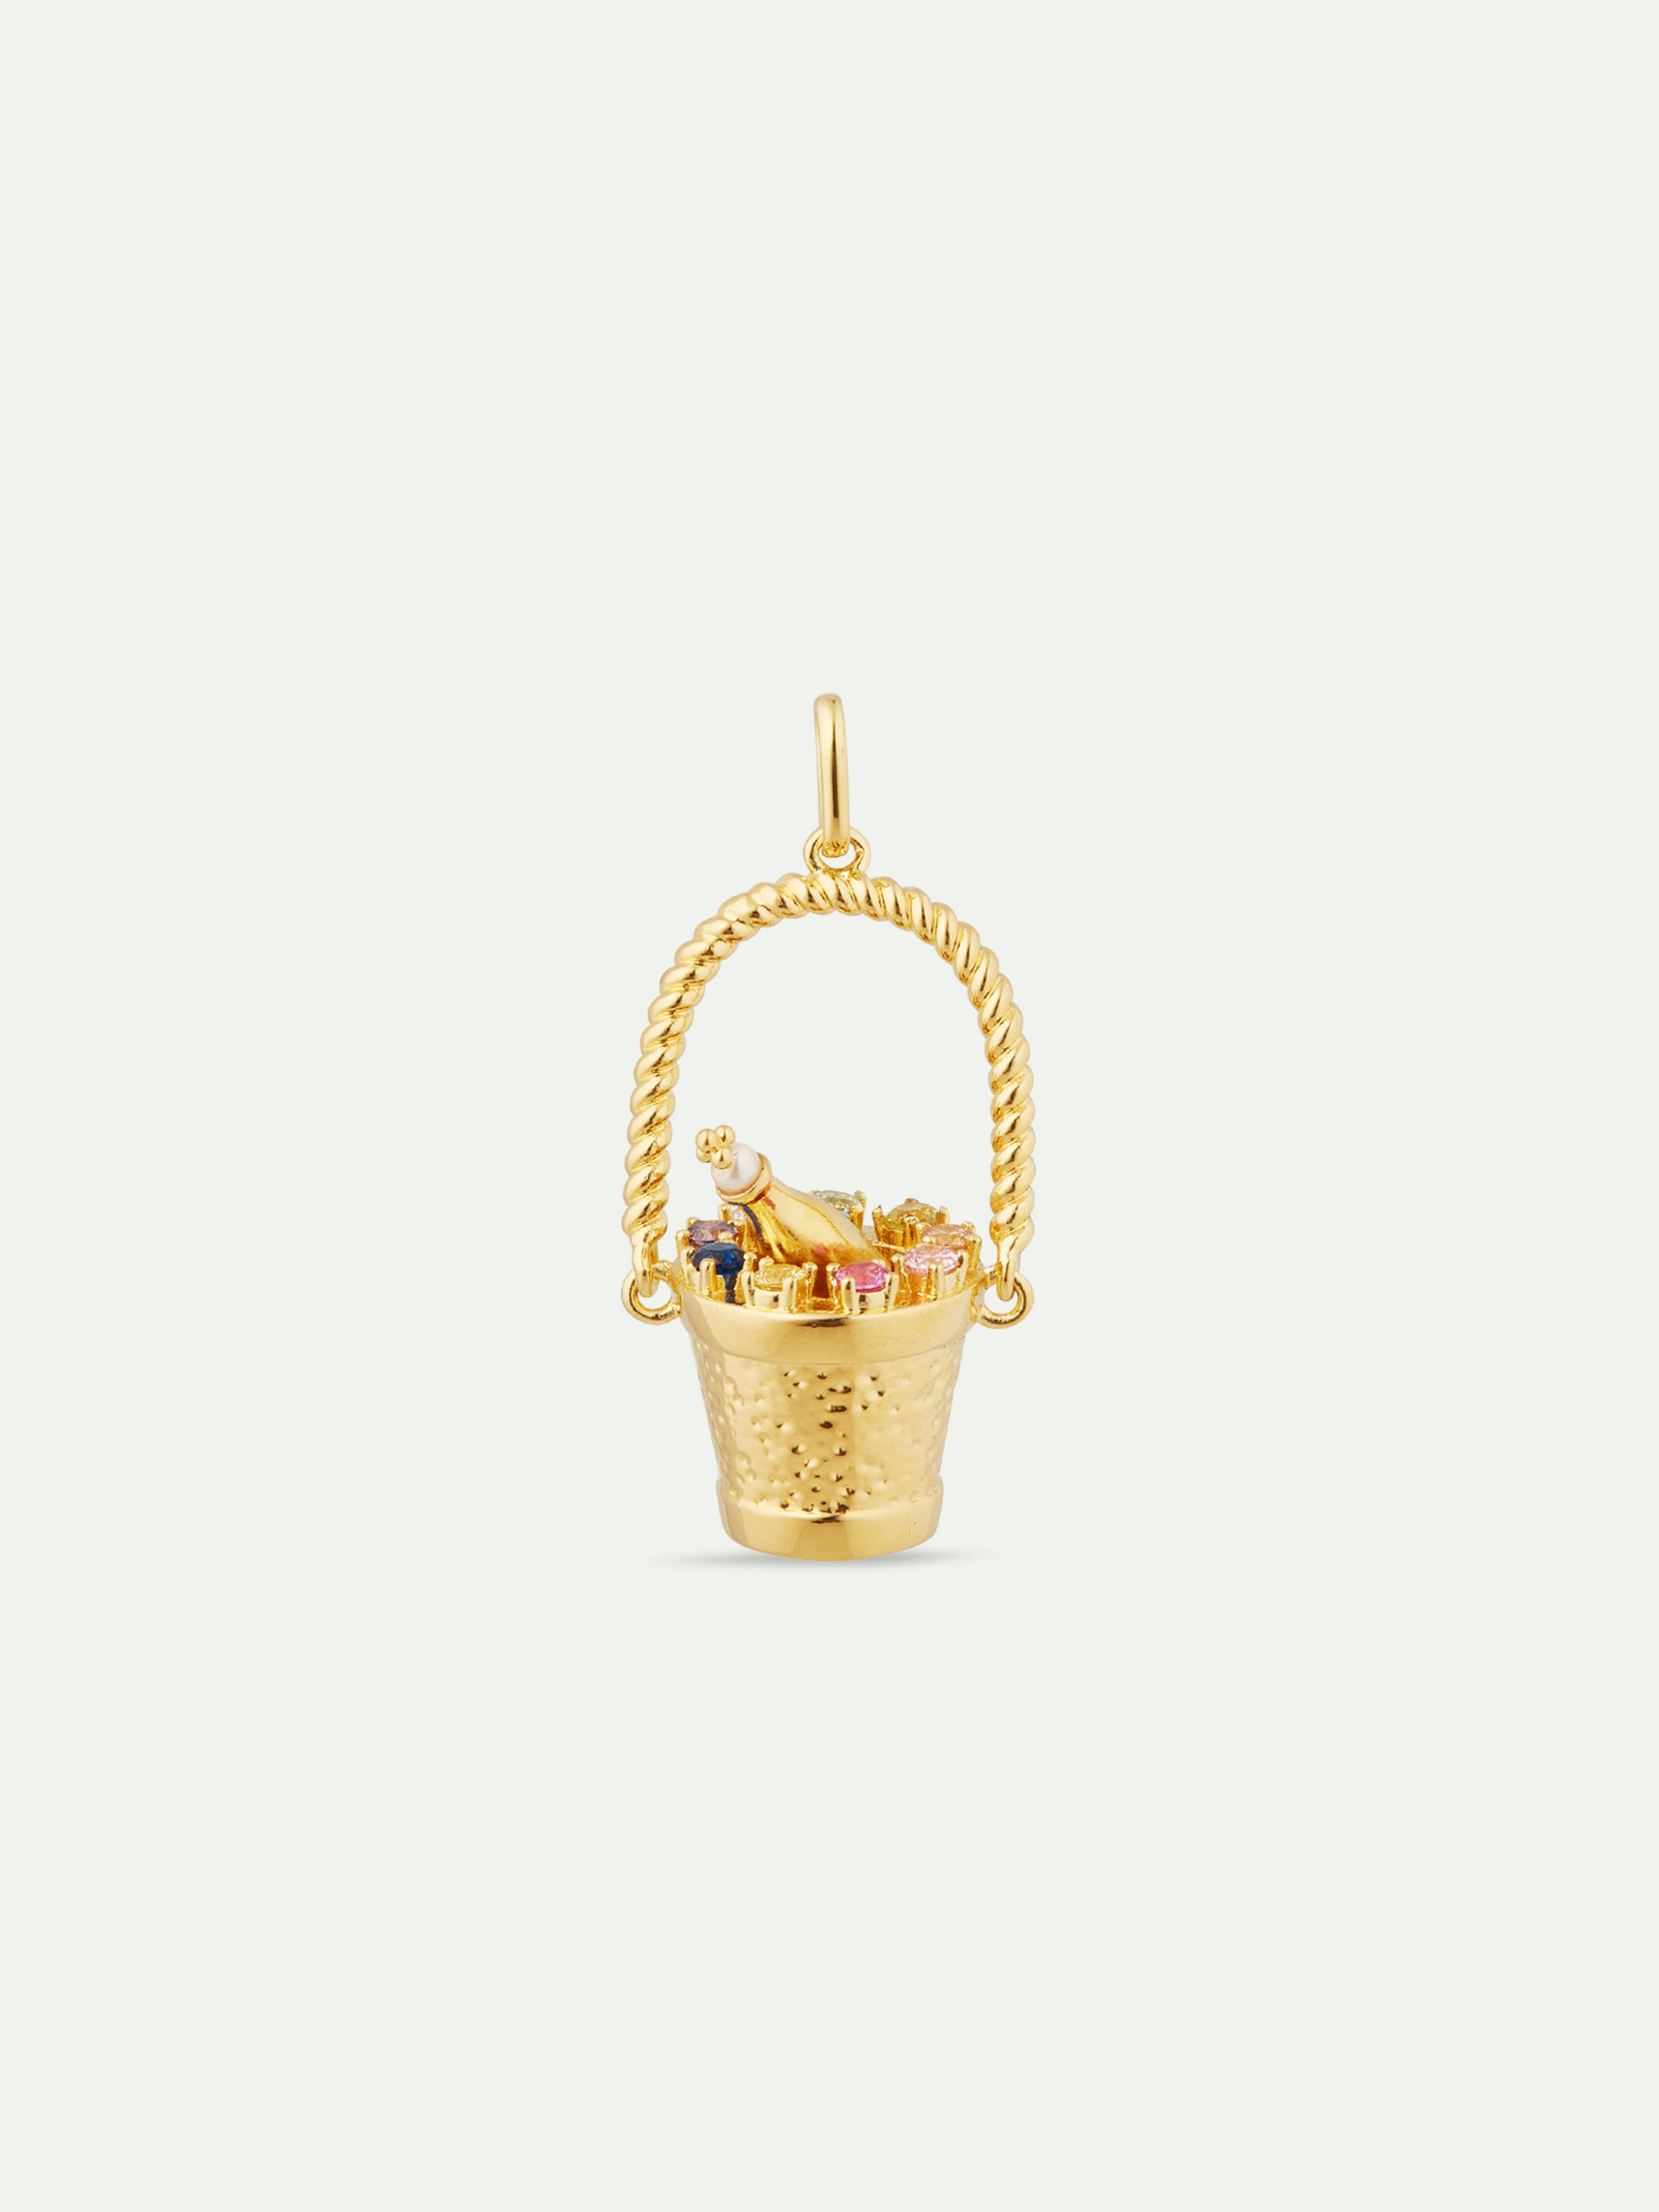 Champagne bucket pendant: Success and Optimism